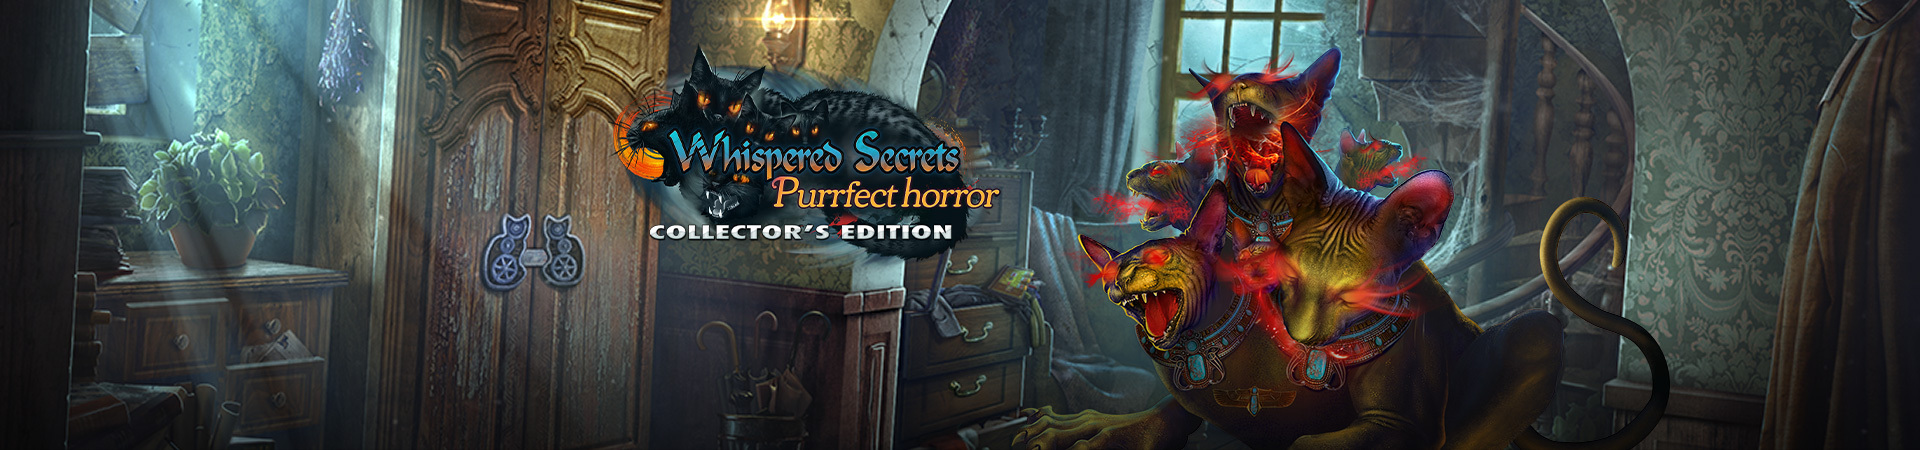 Whispered Secrets: Purrfect Horror CE - <span> Now available</span>